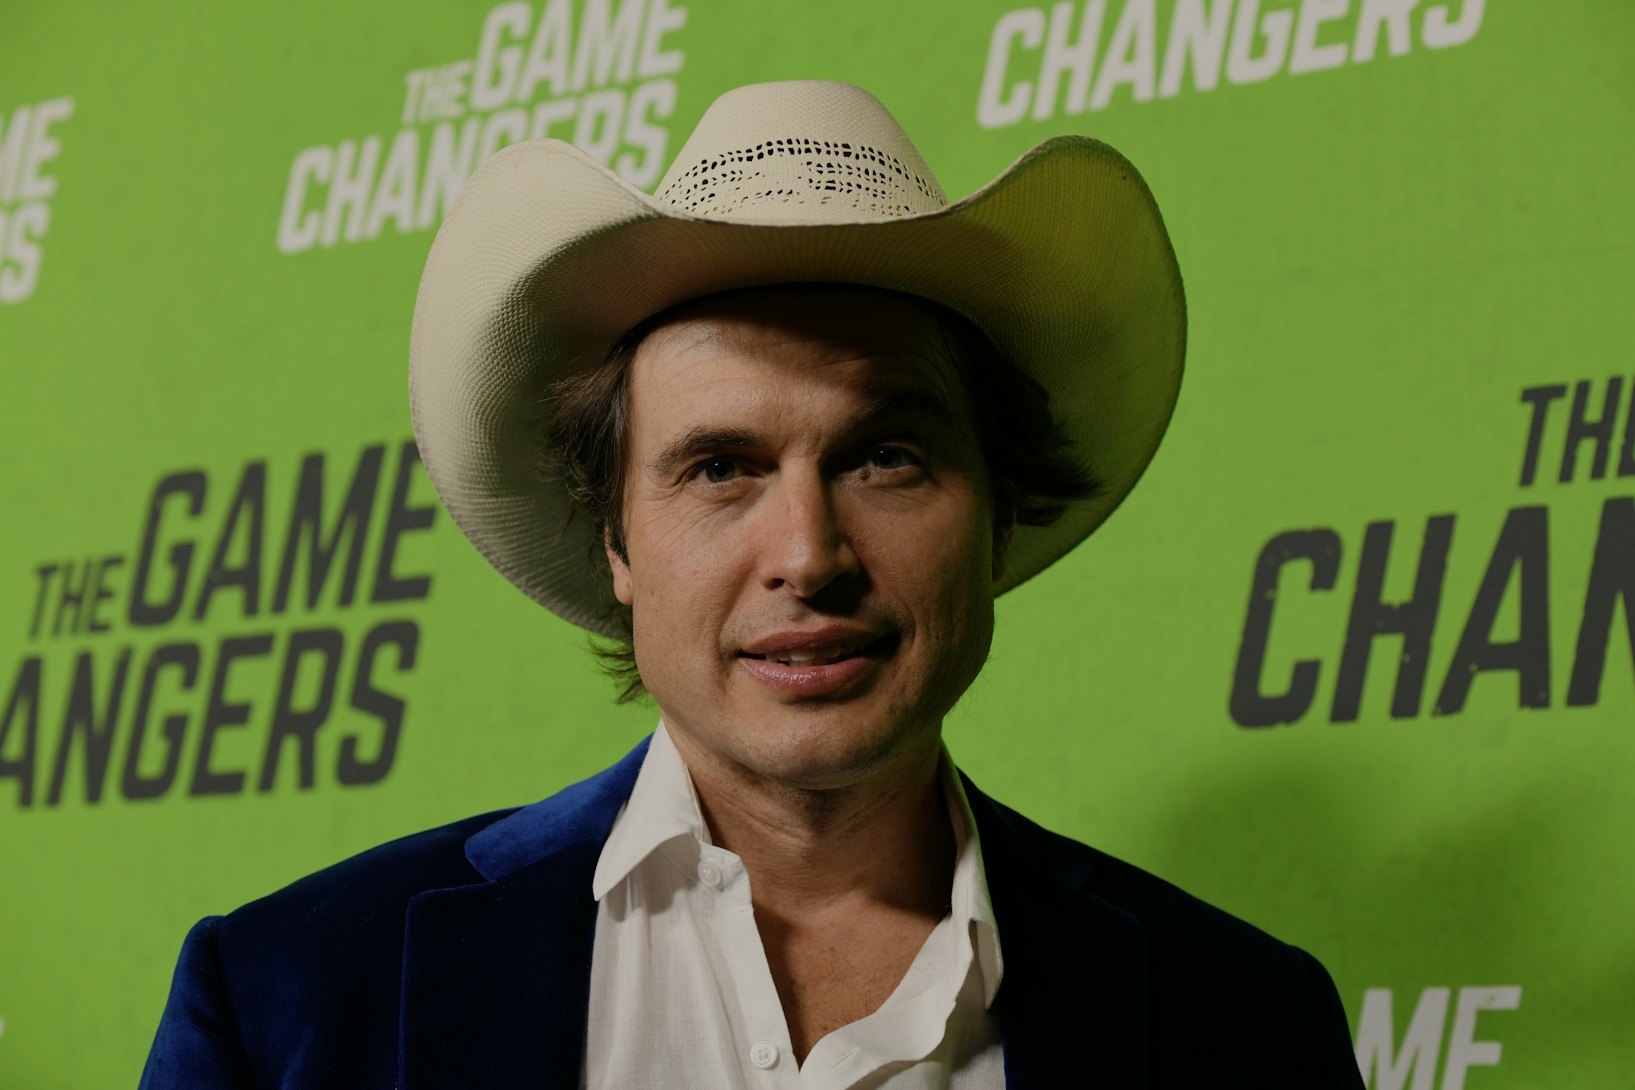 HOLLYWOOD, CALIFORNIA - SEPTEMBER 04: Kimbal Musk attends the Los Angeles Premiere of "The Game Chan...